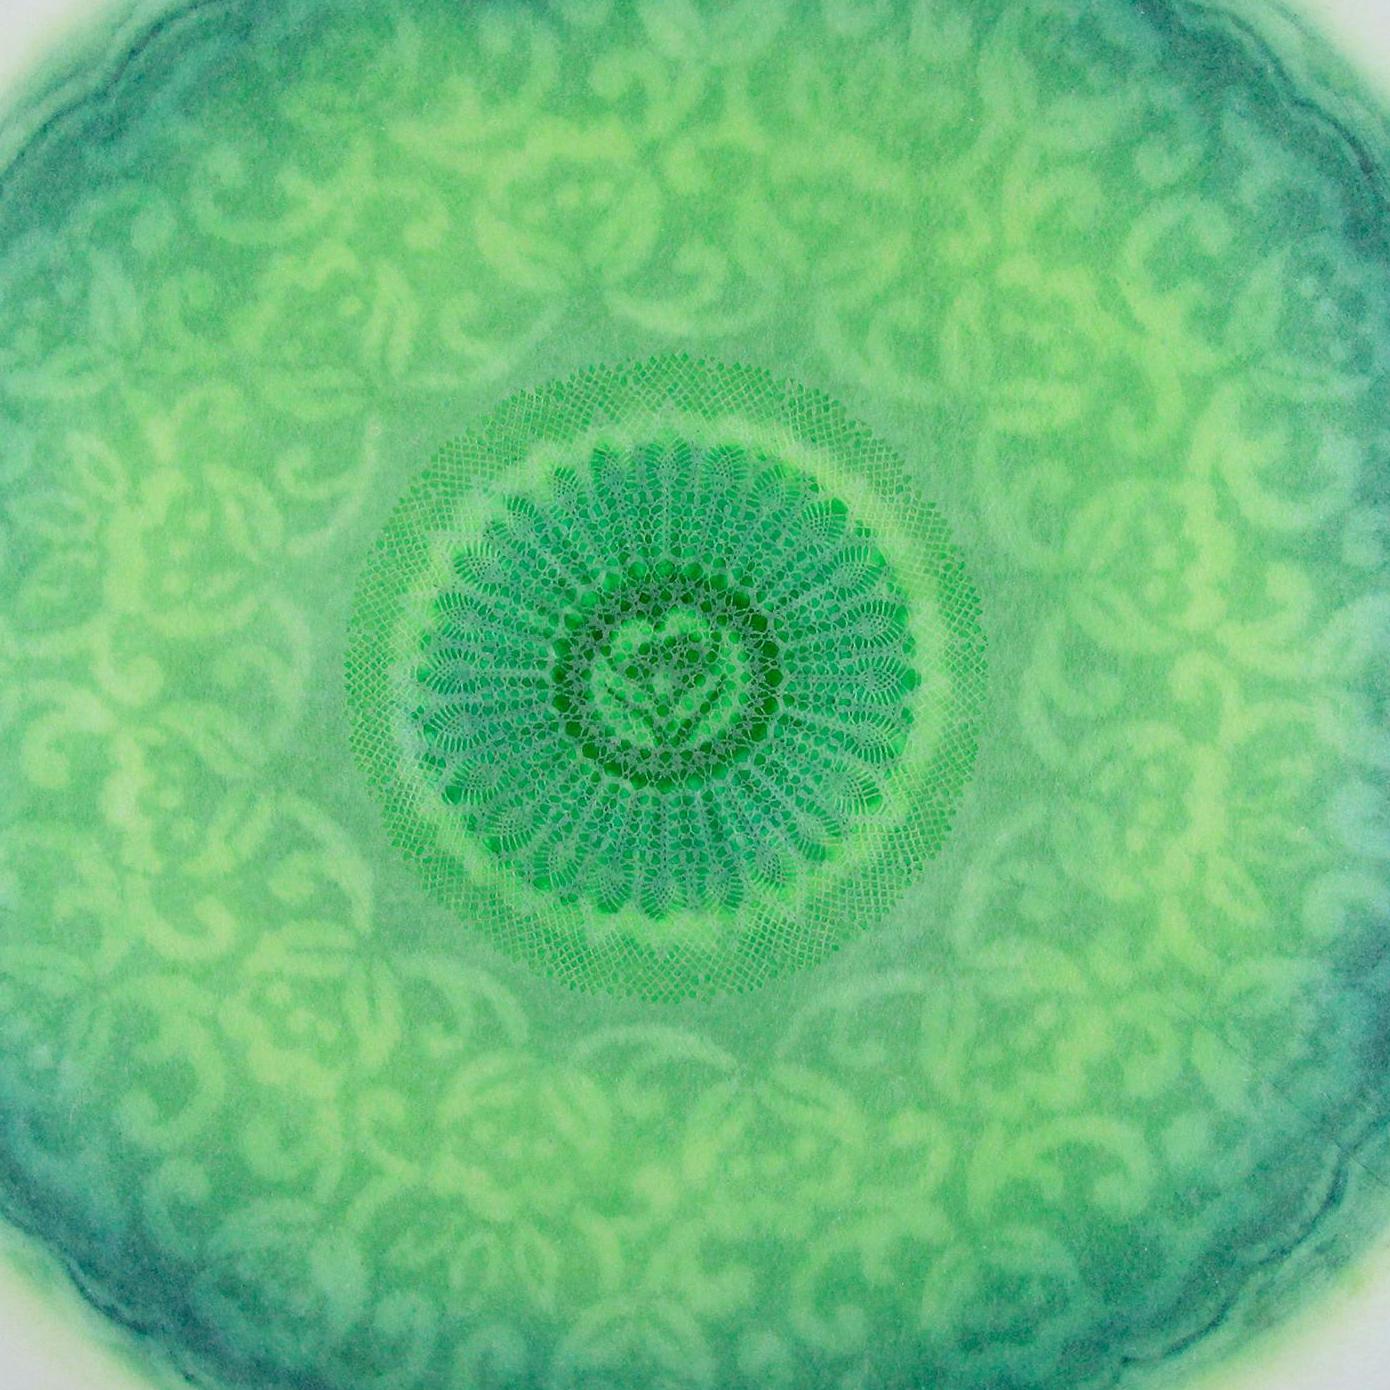 Revolution XXVII - green intricate lacey lasercut abstract geometric circle  - Contemporary Mixed Media Art by Amy Sands